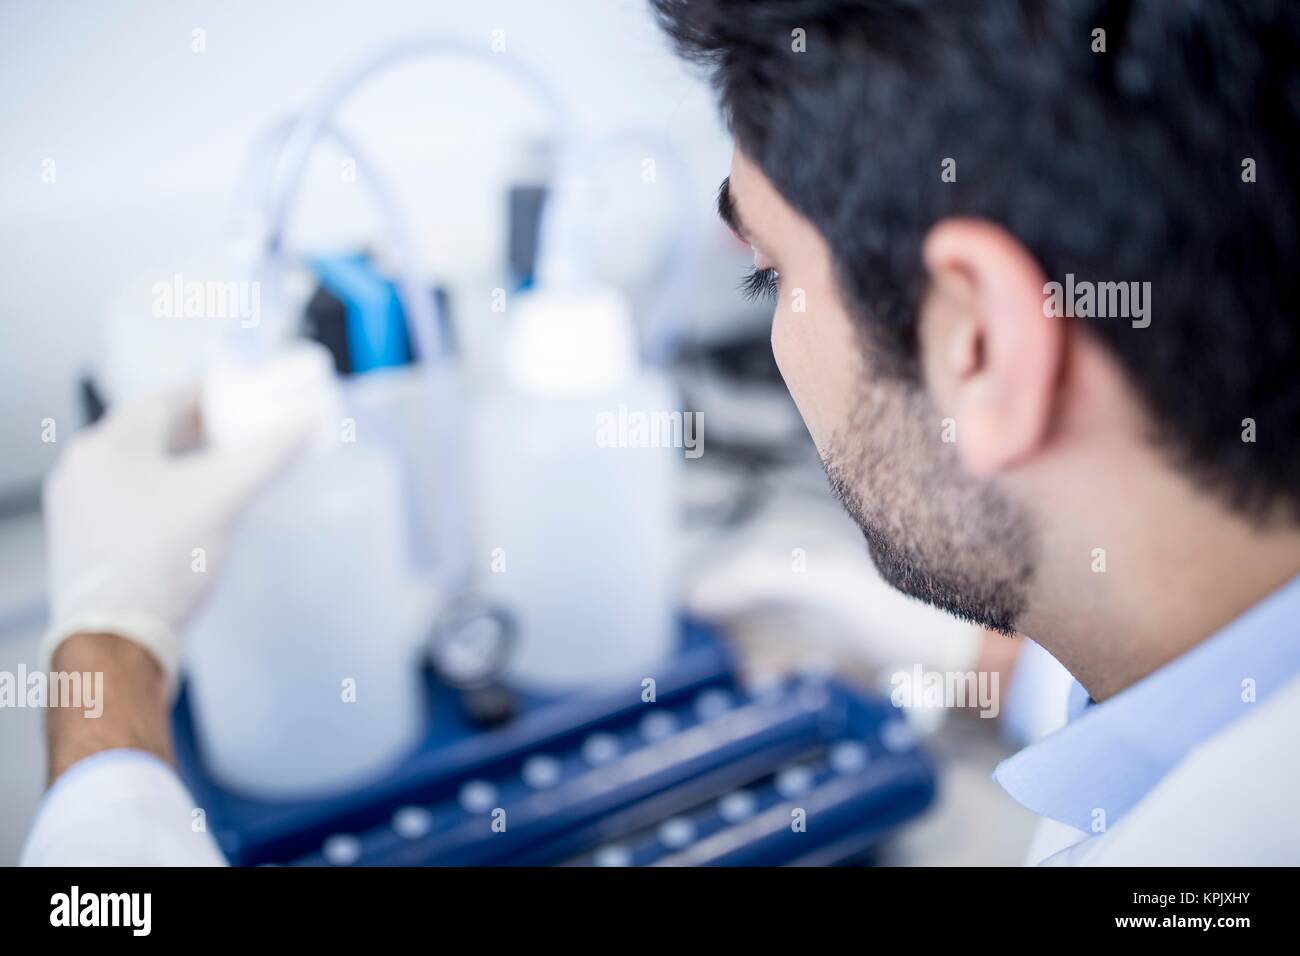 Male laboratory assistant using equipment. Stock Photo